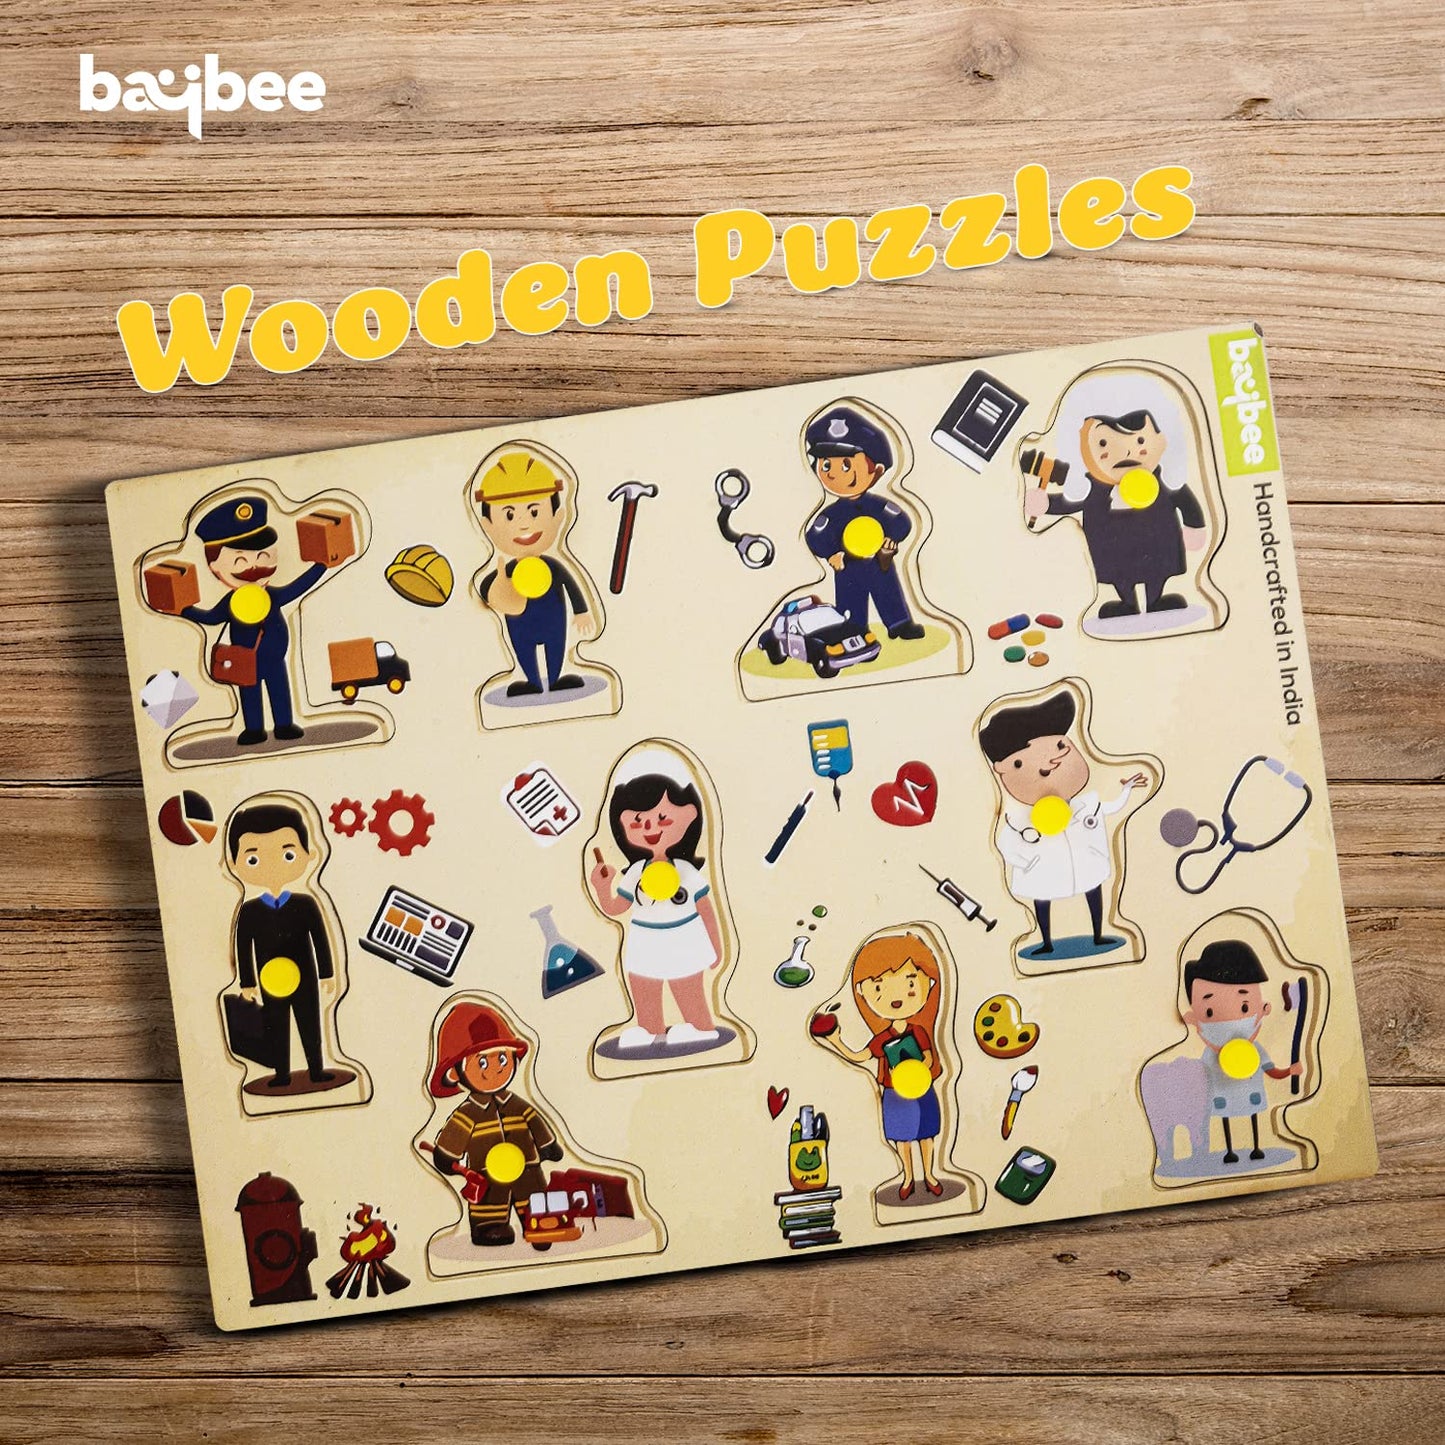 BAYBEE Community Helpers Wooden Puzzle Games for Kids with Easy Pulling Knob 10 Pcs